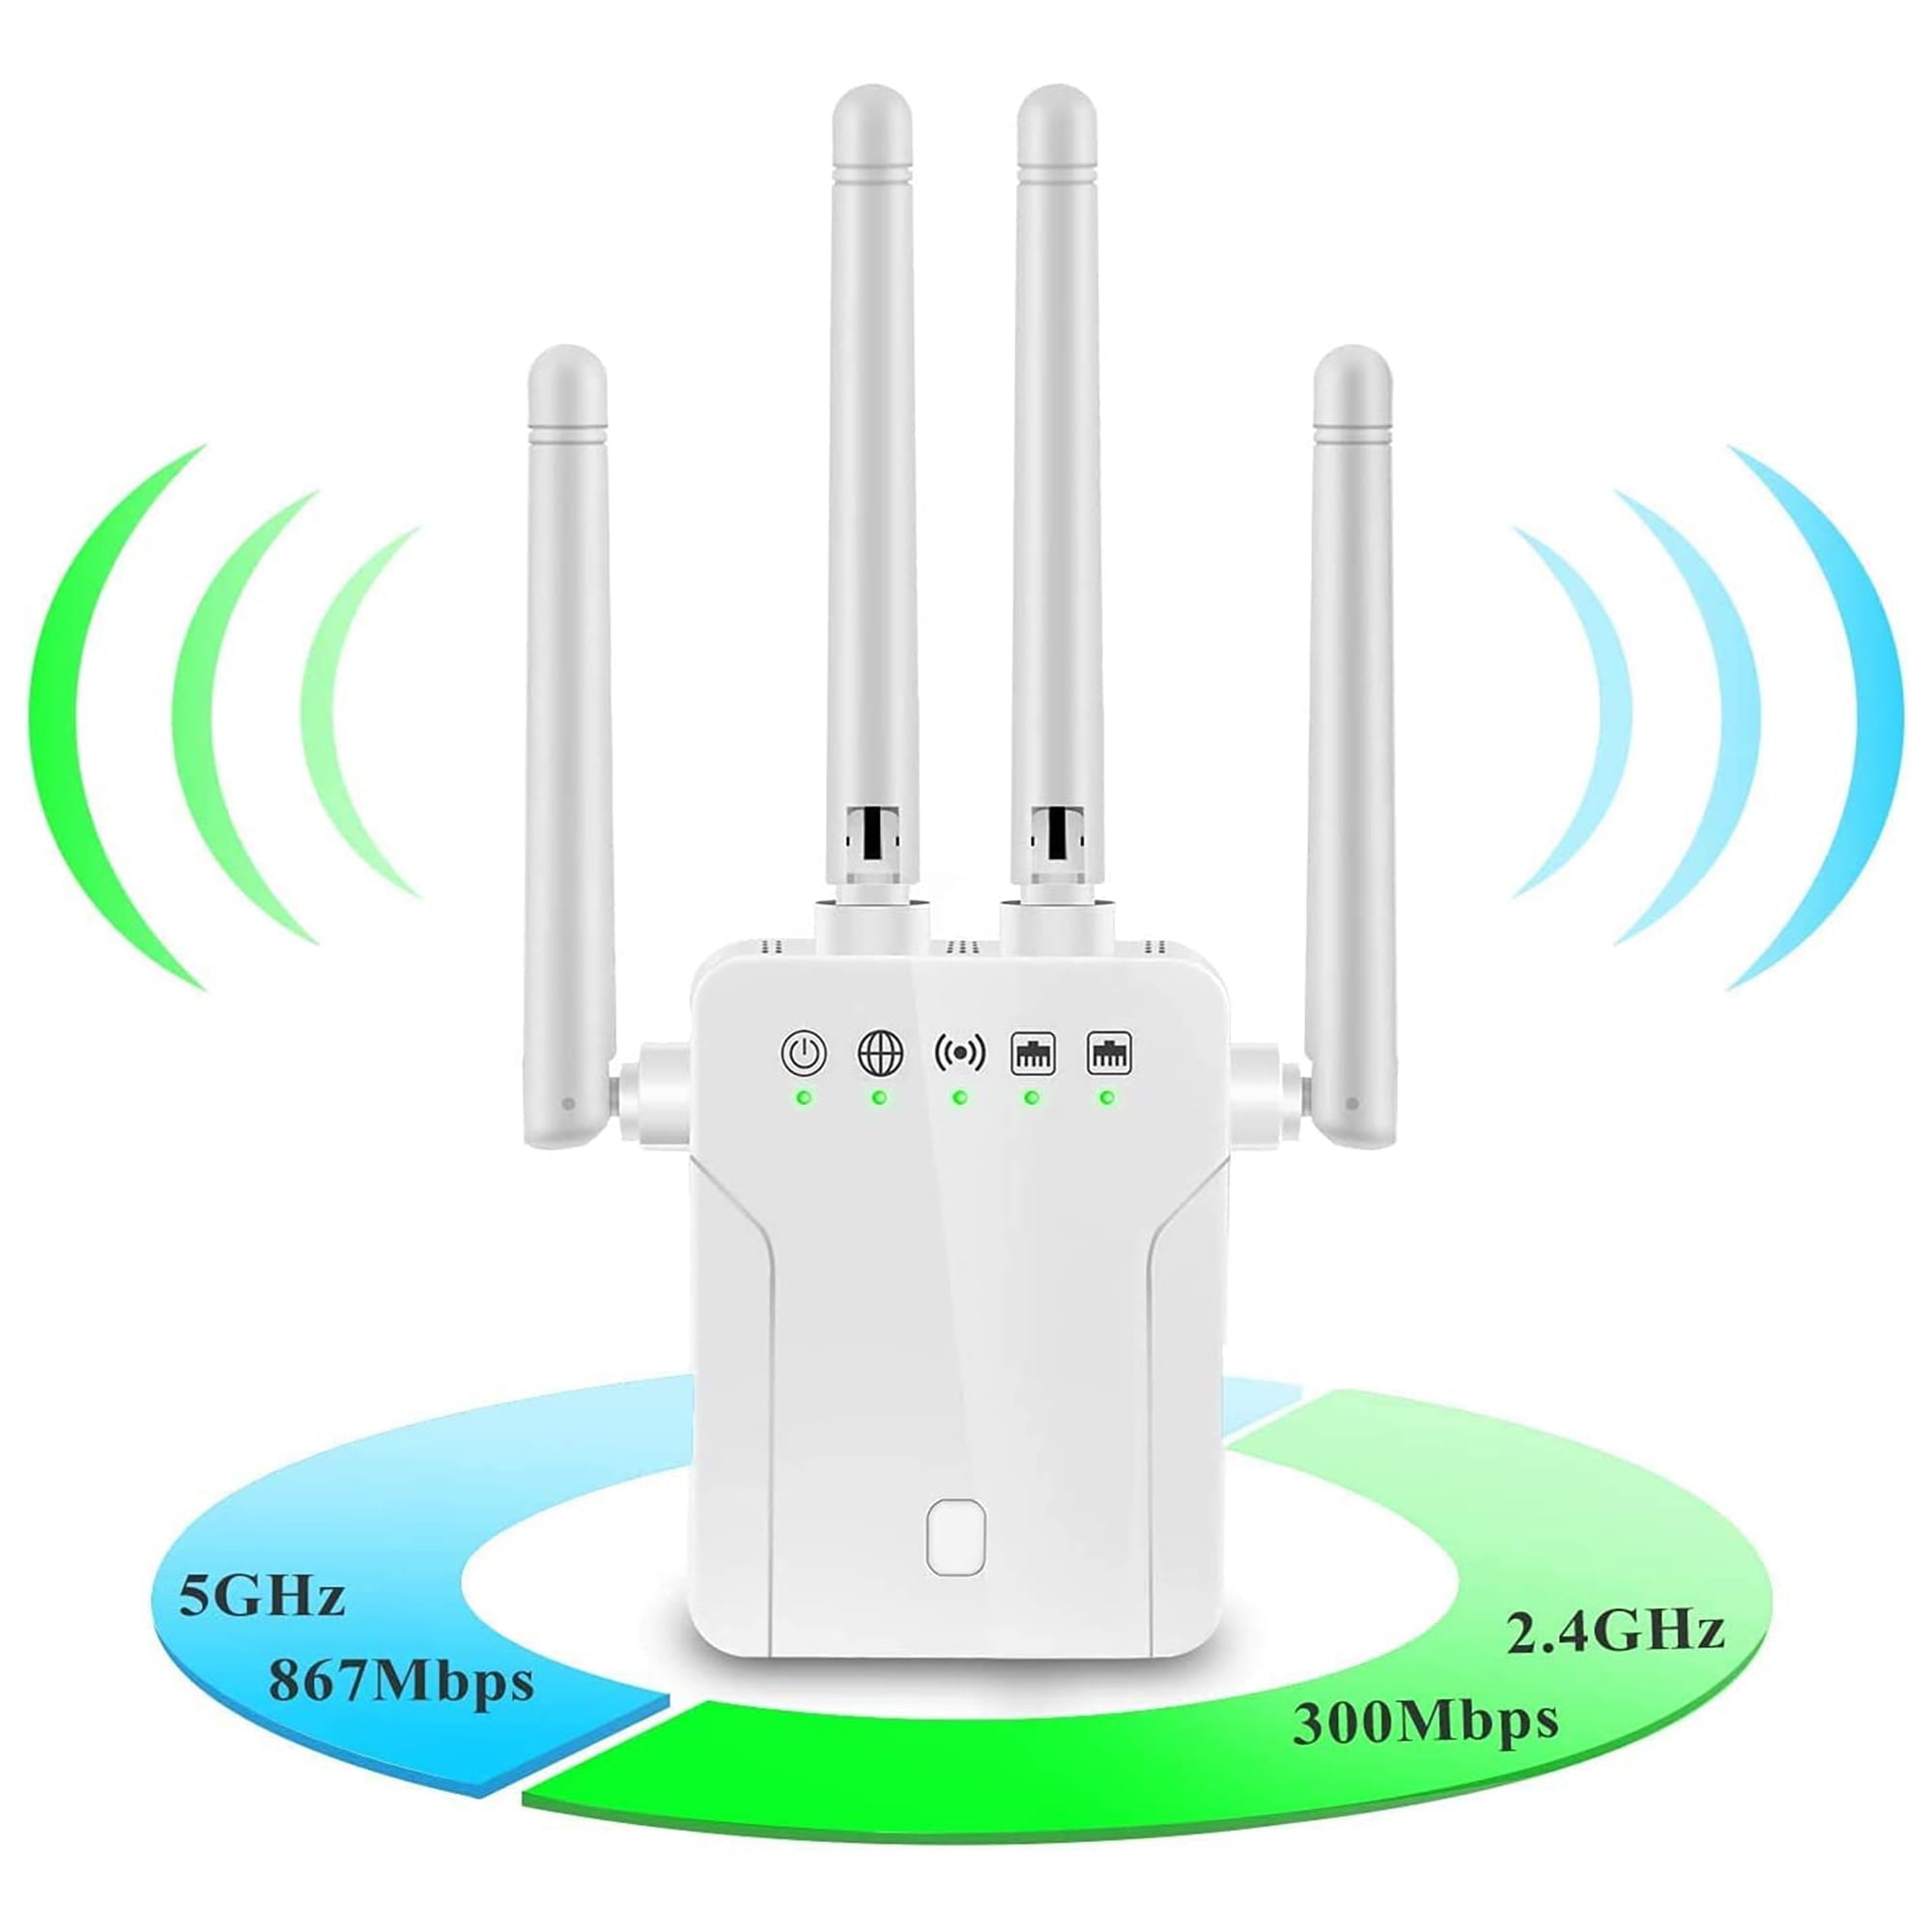 WSKY WiFi Repeater Internet with Ethernet Port, 1200Mbps WPS WiFi Extender Covers 4000sq.ft for Home - Walmart.com